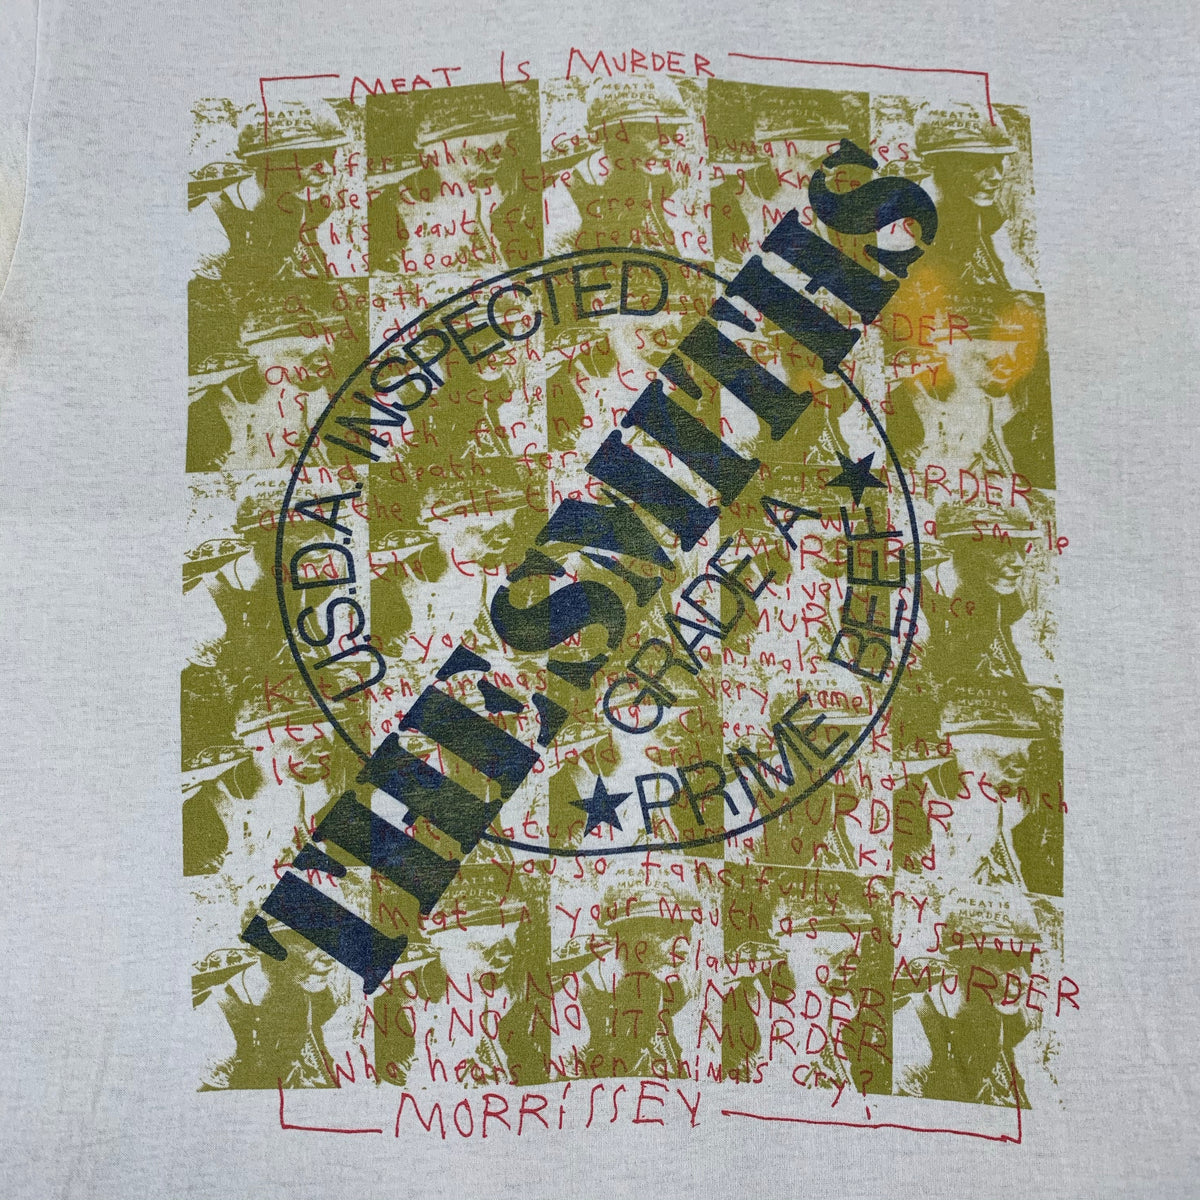 Vintage The Smiths “Meat Is Murder” T-Shirt